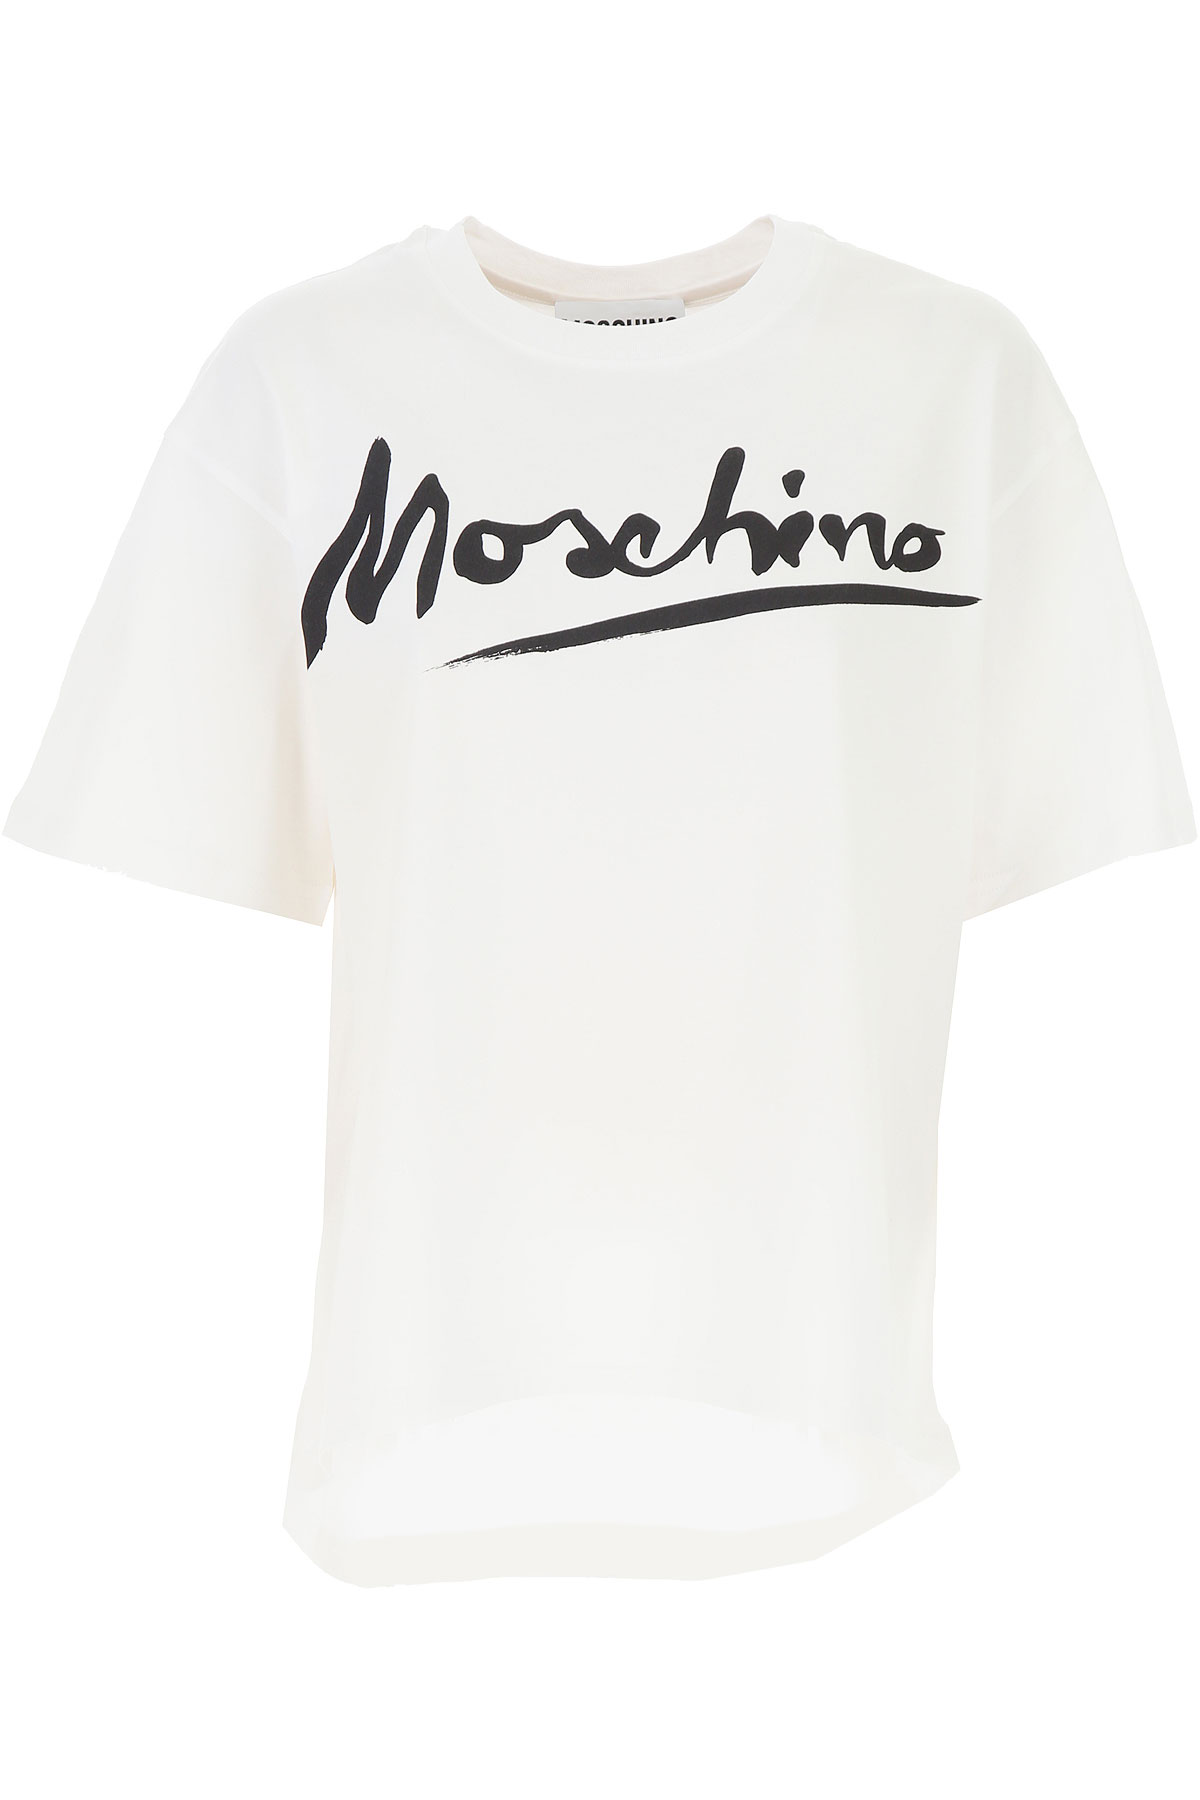 Womens Clothing Moschino, Style code: a0707-0440-1001